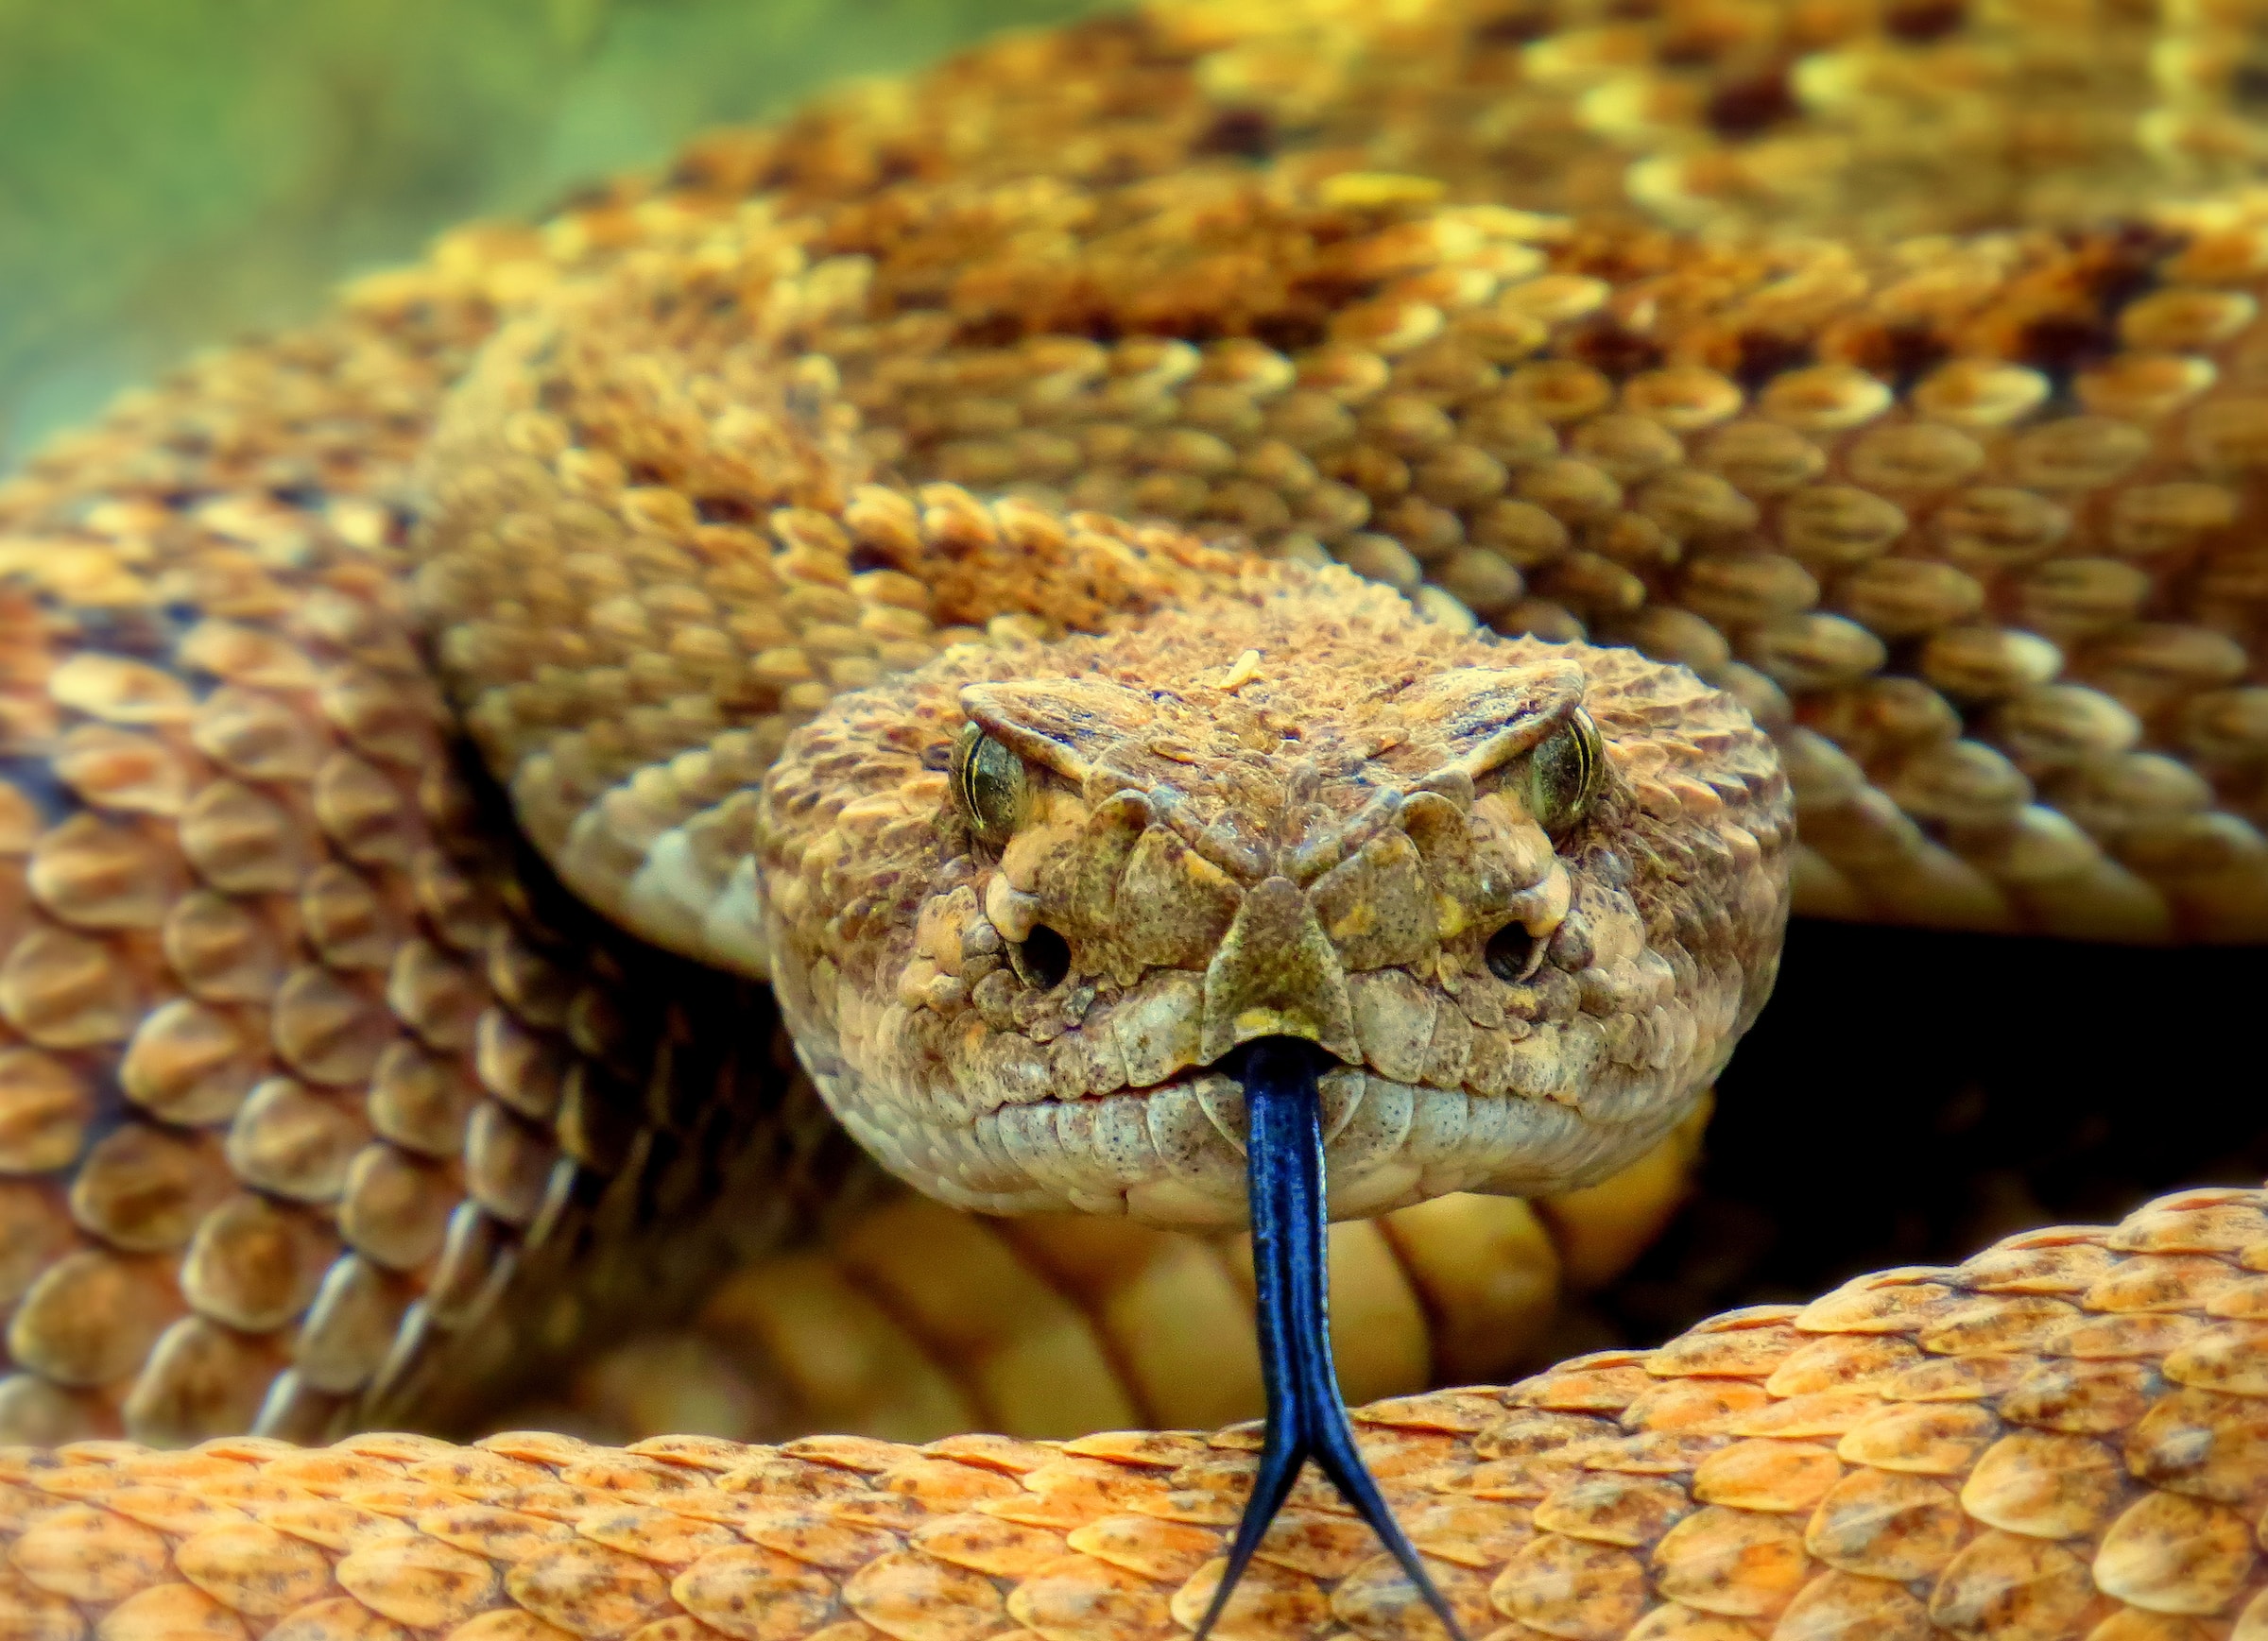 Debunking 10 Common Misconceptions About Rattlesnakes